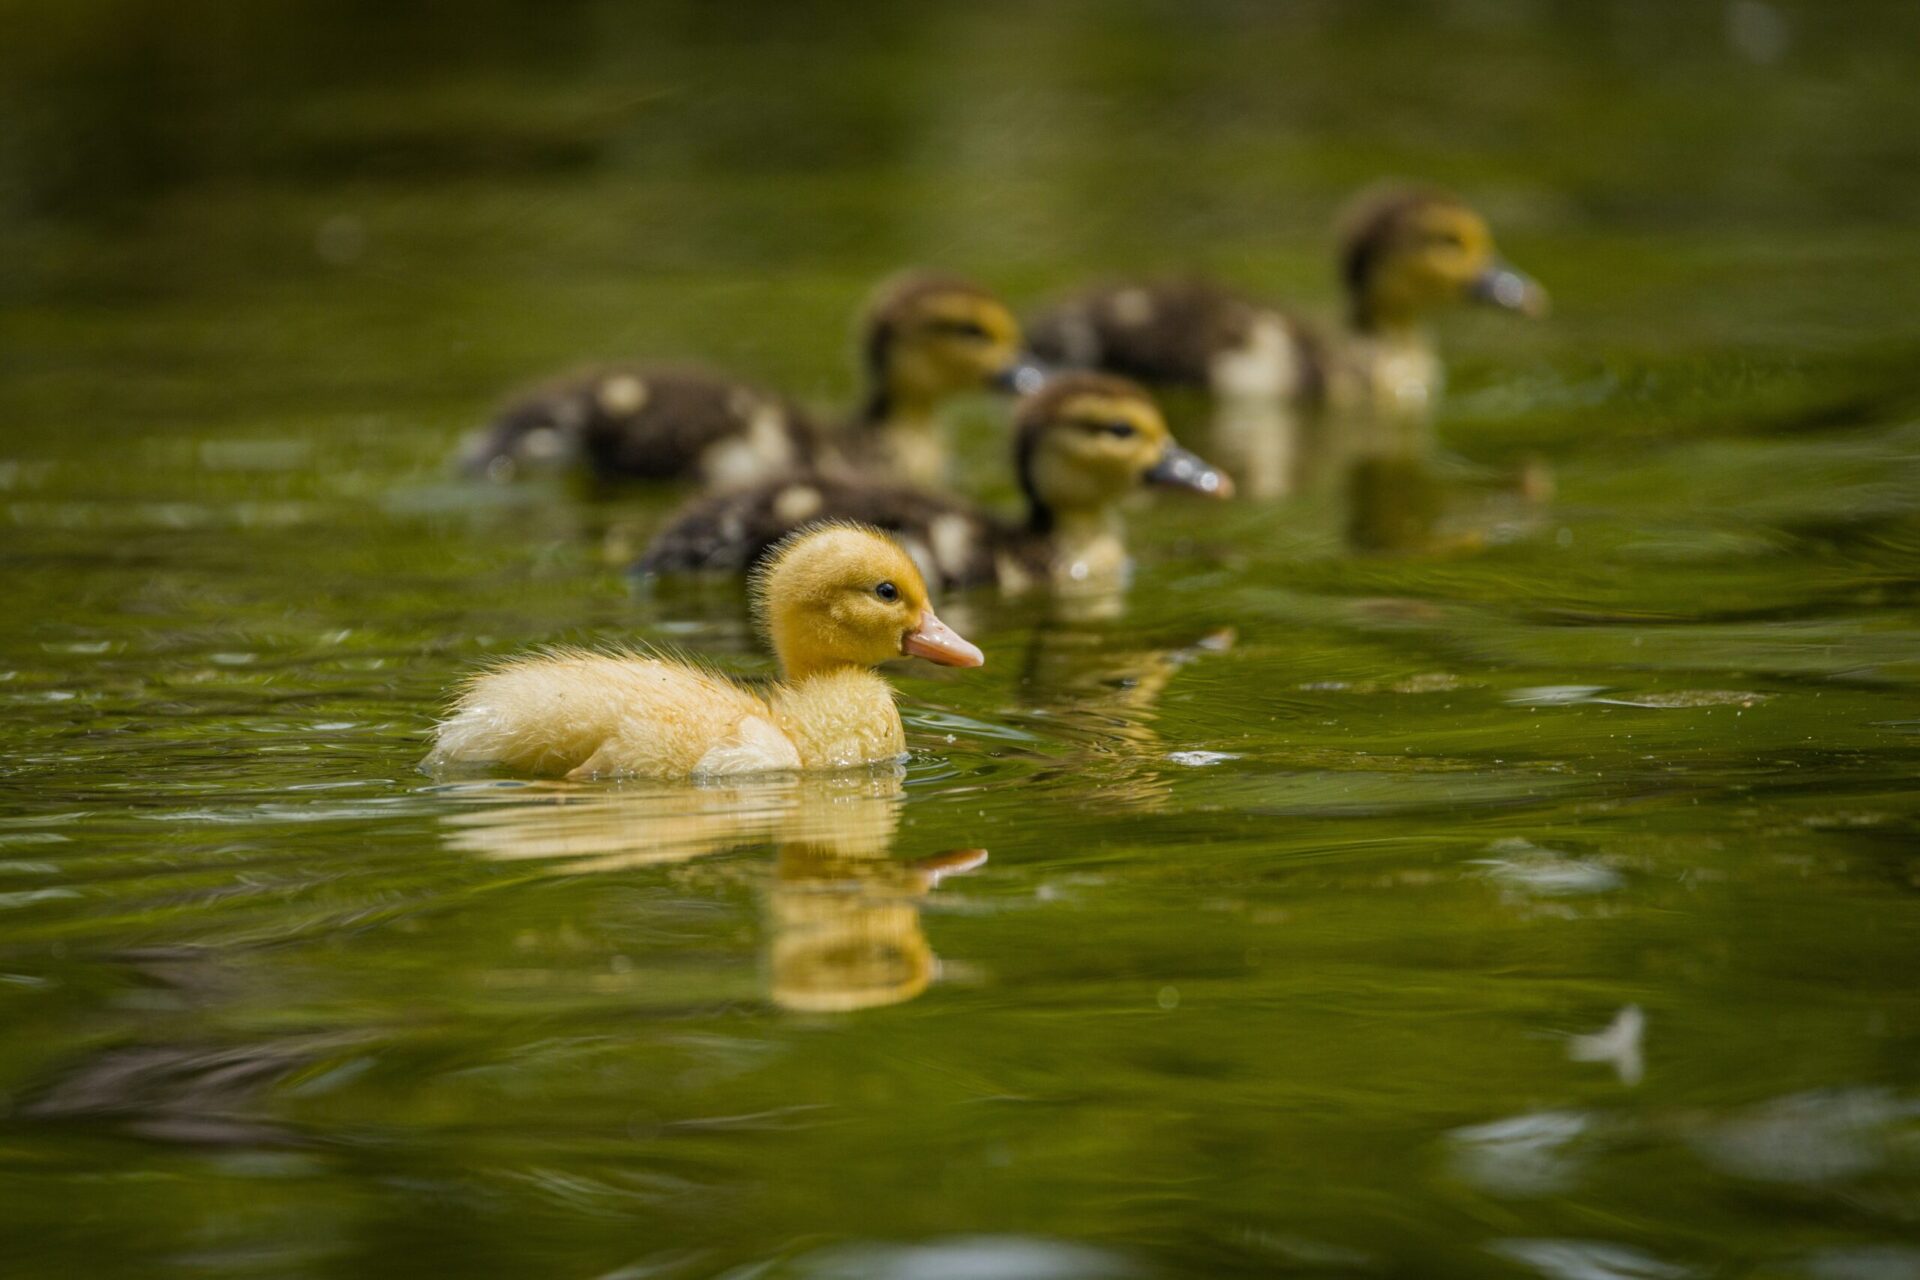 Many Ducklings Swimming in the Water